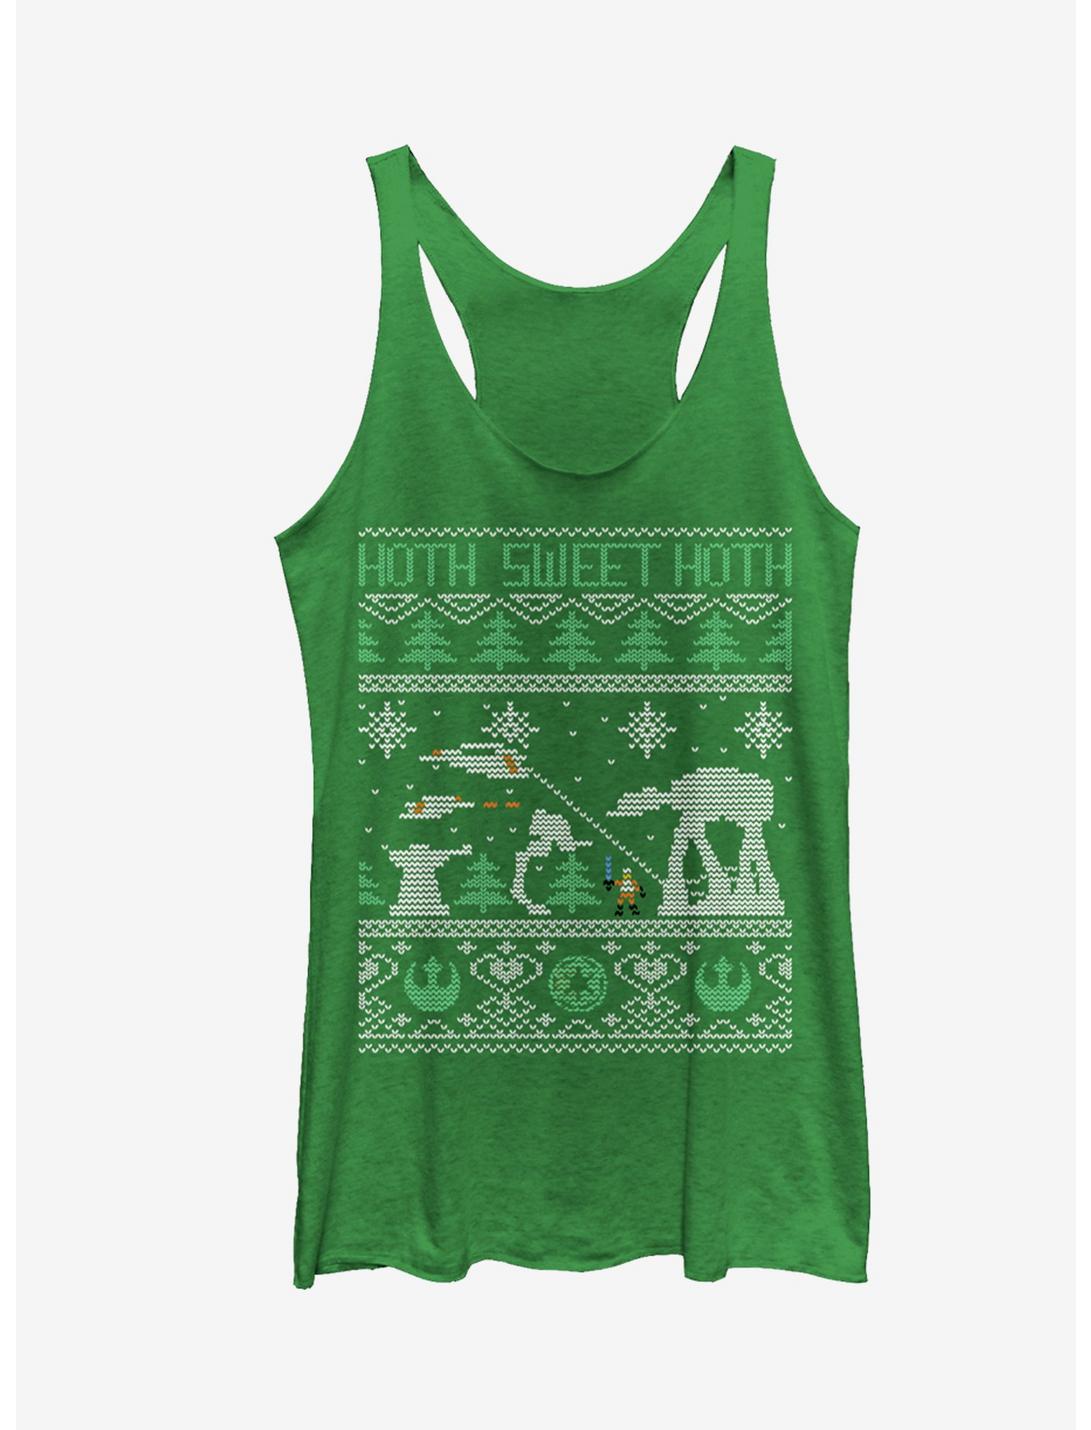 Star Wars Hoth Sweet Hoth Ugly Christmas Sweater Girls Tanks, ENVY, hi-res